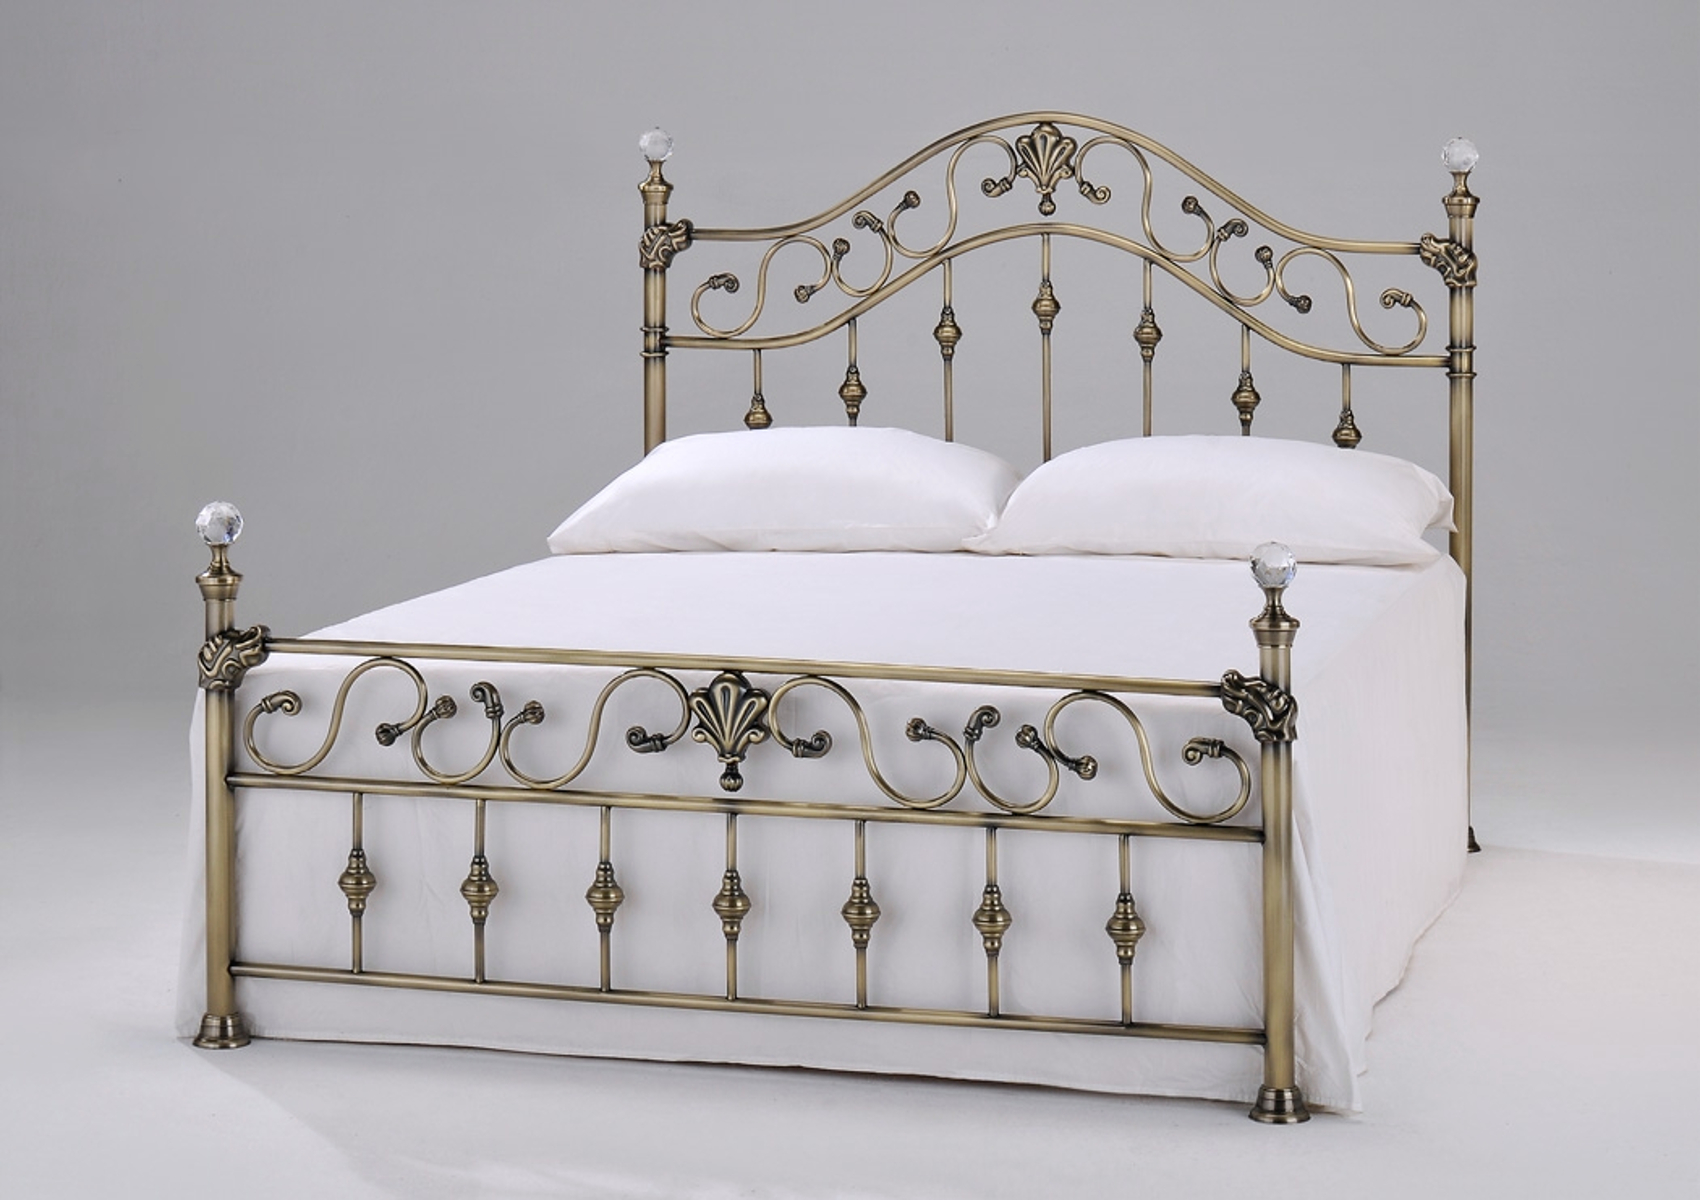 View Harmony Antique Brass Metal King Size Bed Time4Sleep information